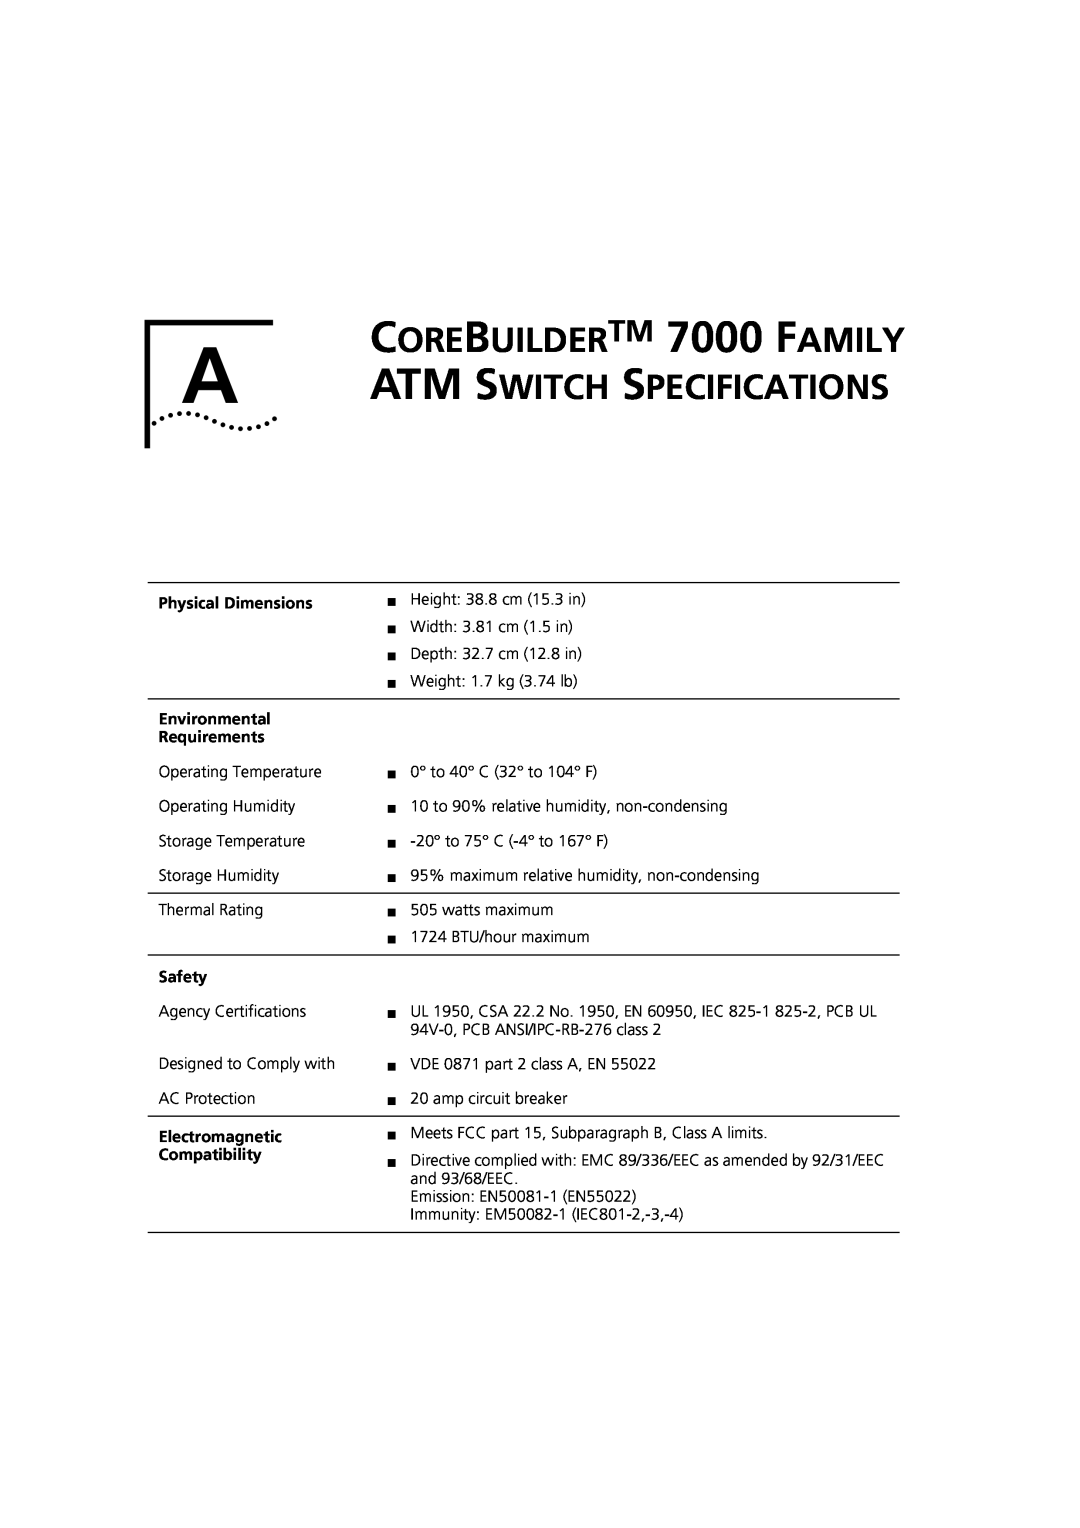 3Com DUA3700-0BAA04 manual CORE BUILDER TM 7000 FAMILY, Atm Switch Specifications 